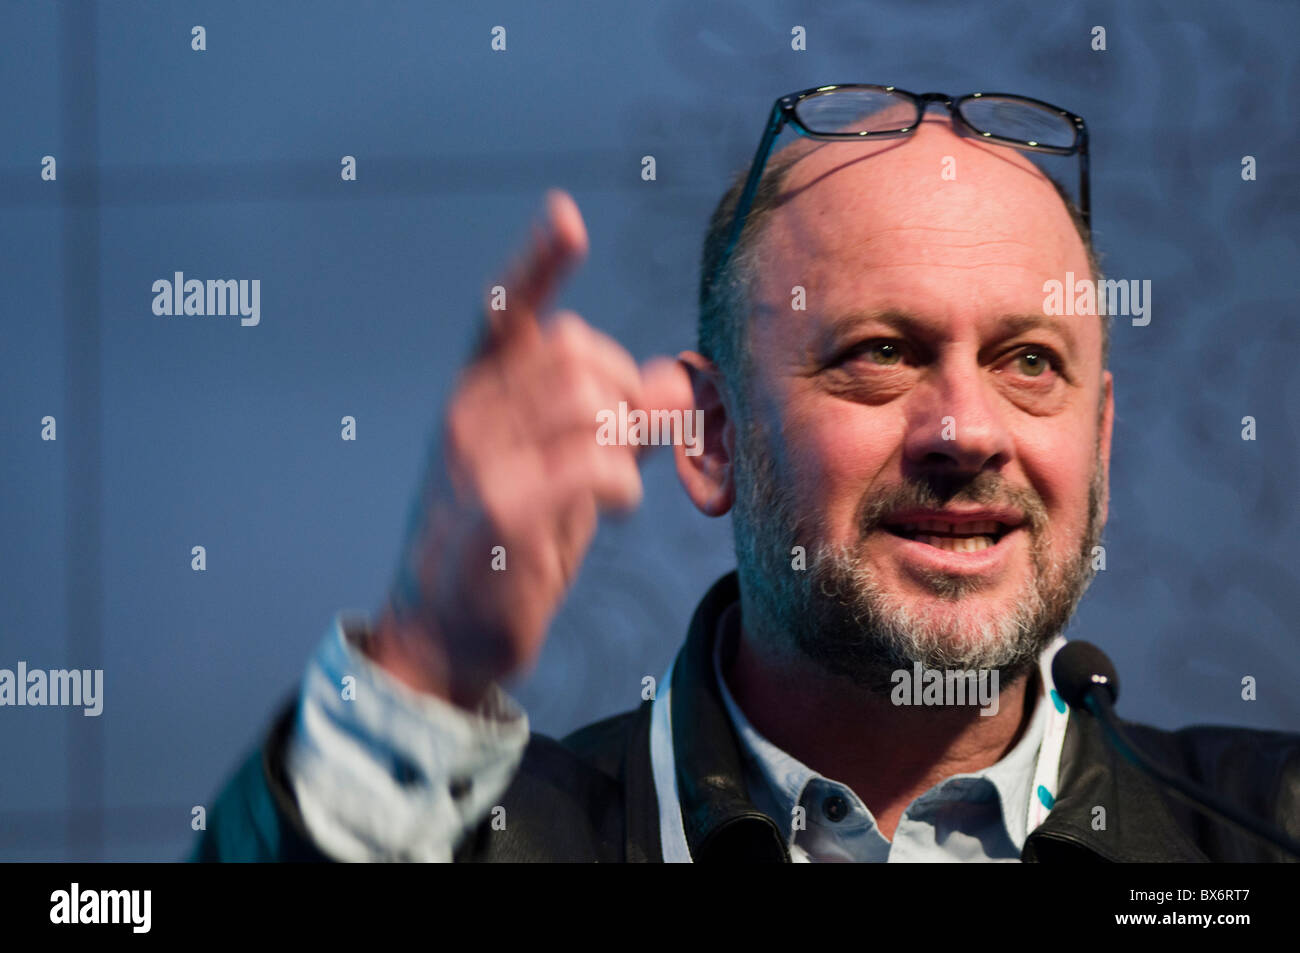 Australian scientist, author and climatologist, Doctor Tim Flannery addressing a conference in Melbourne 29 November 2010 Stock Photo